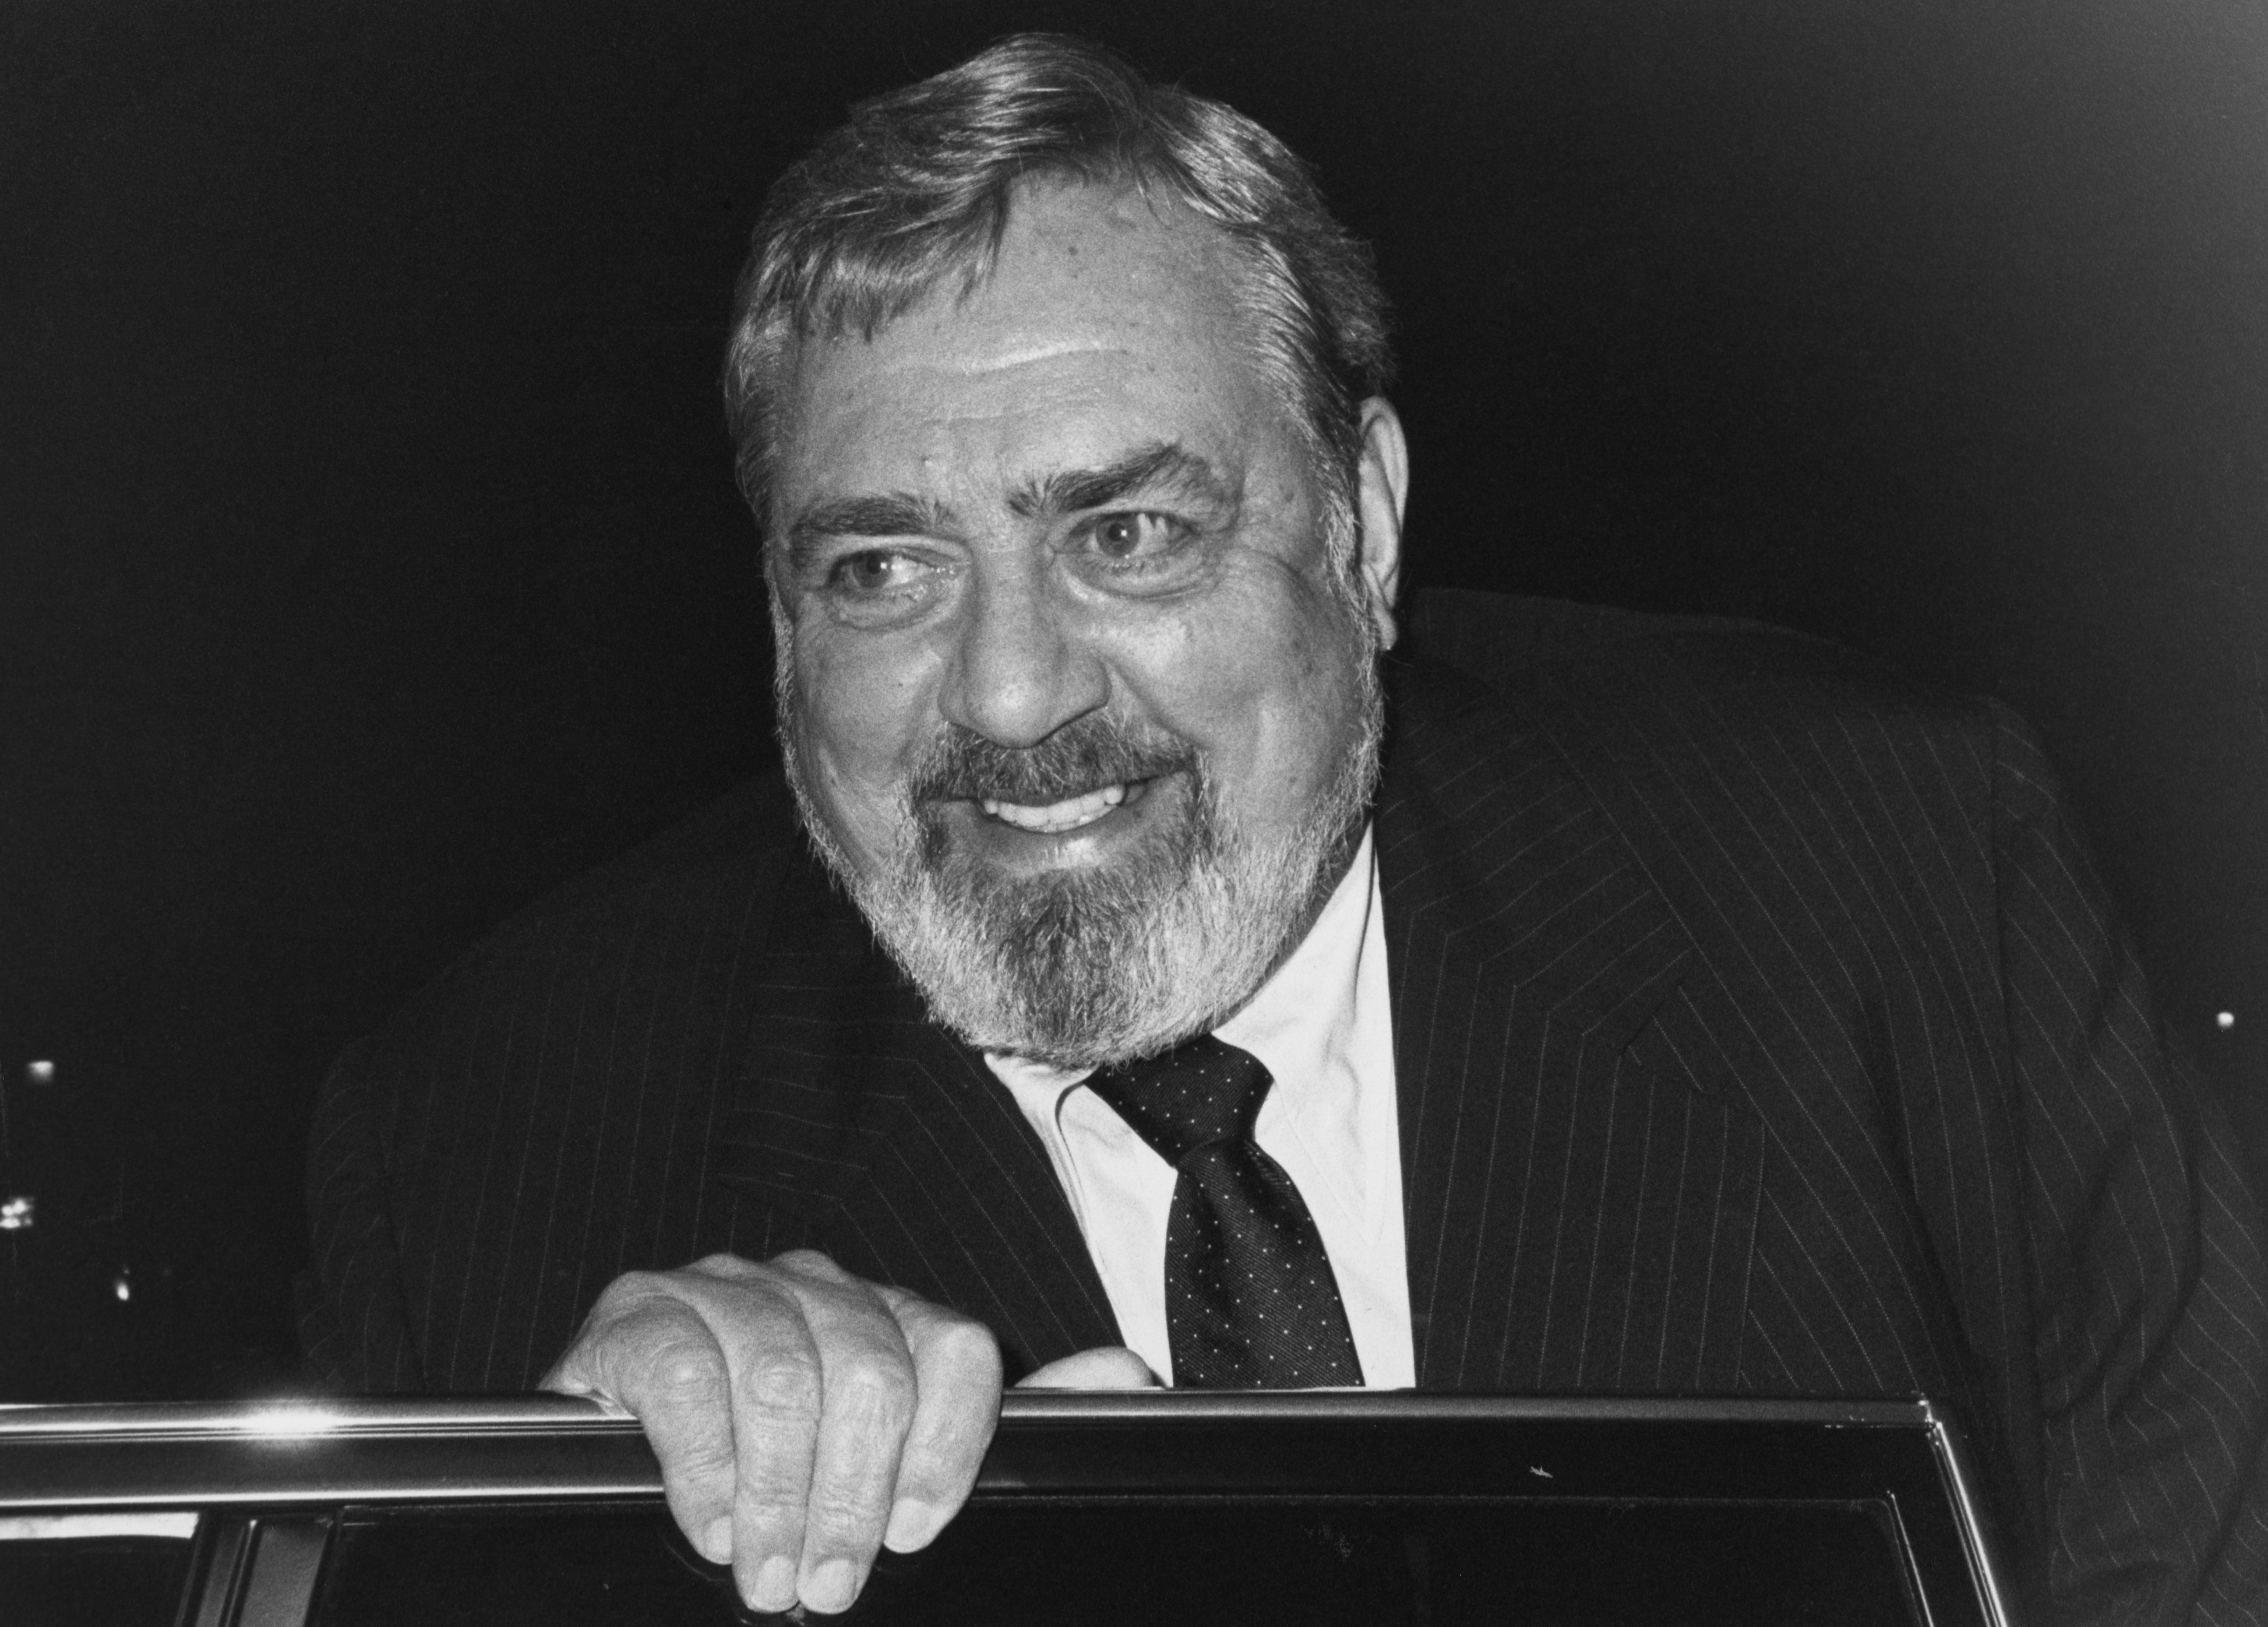 Raymond Burr photographed smiling with his hand on a car door in 1985 |  Source: Getty Images